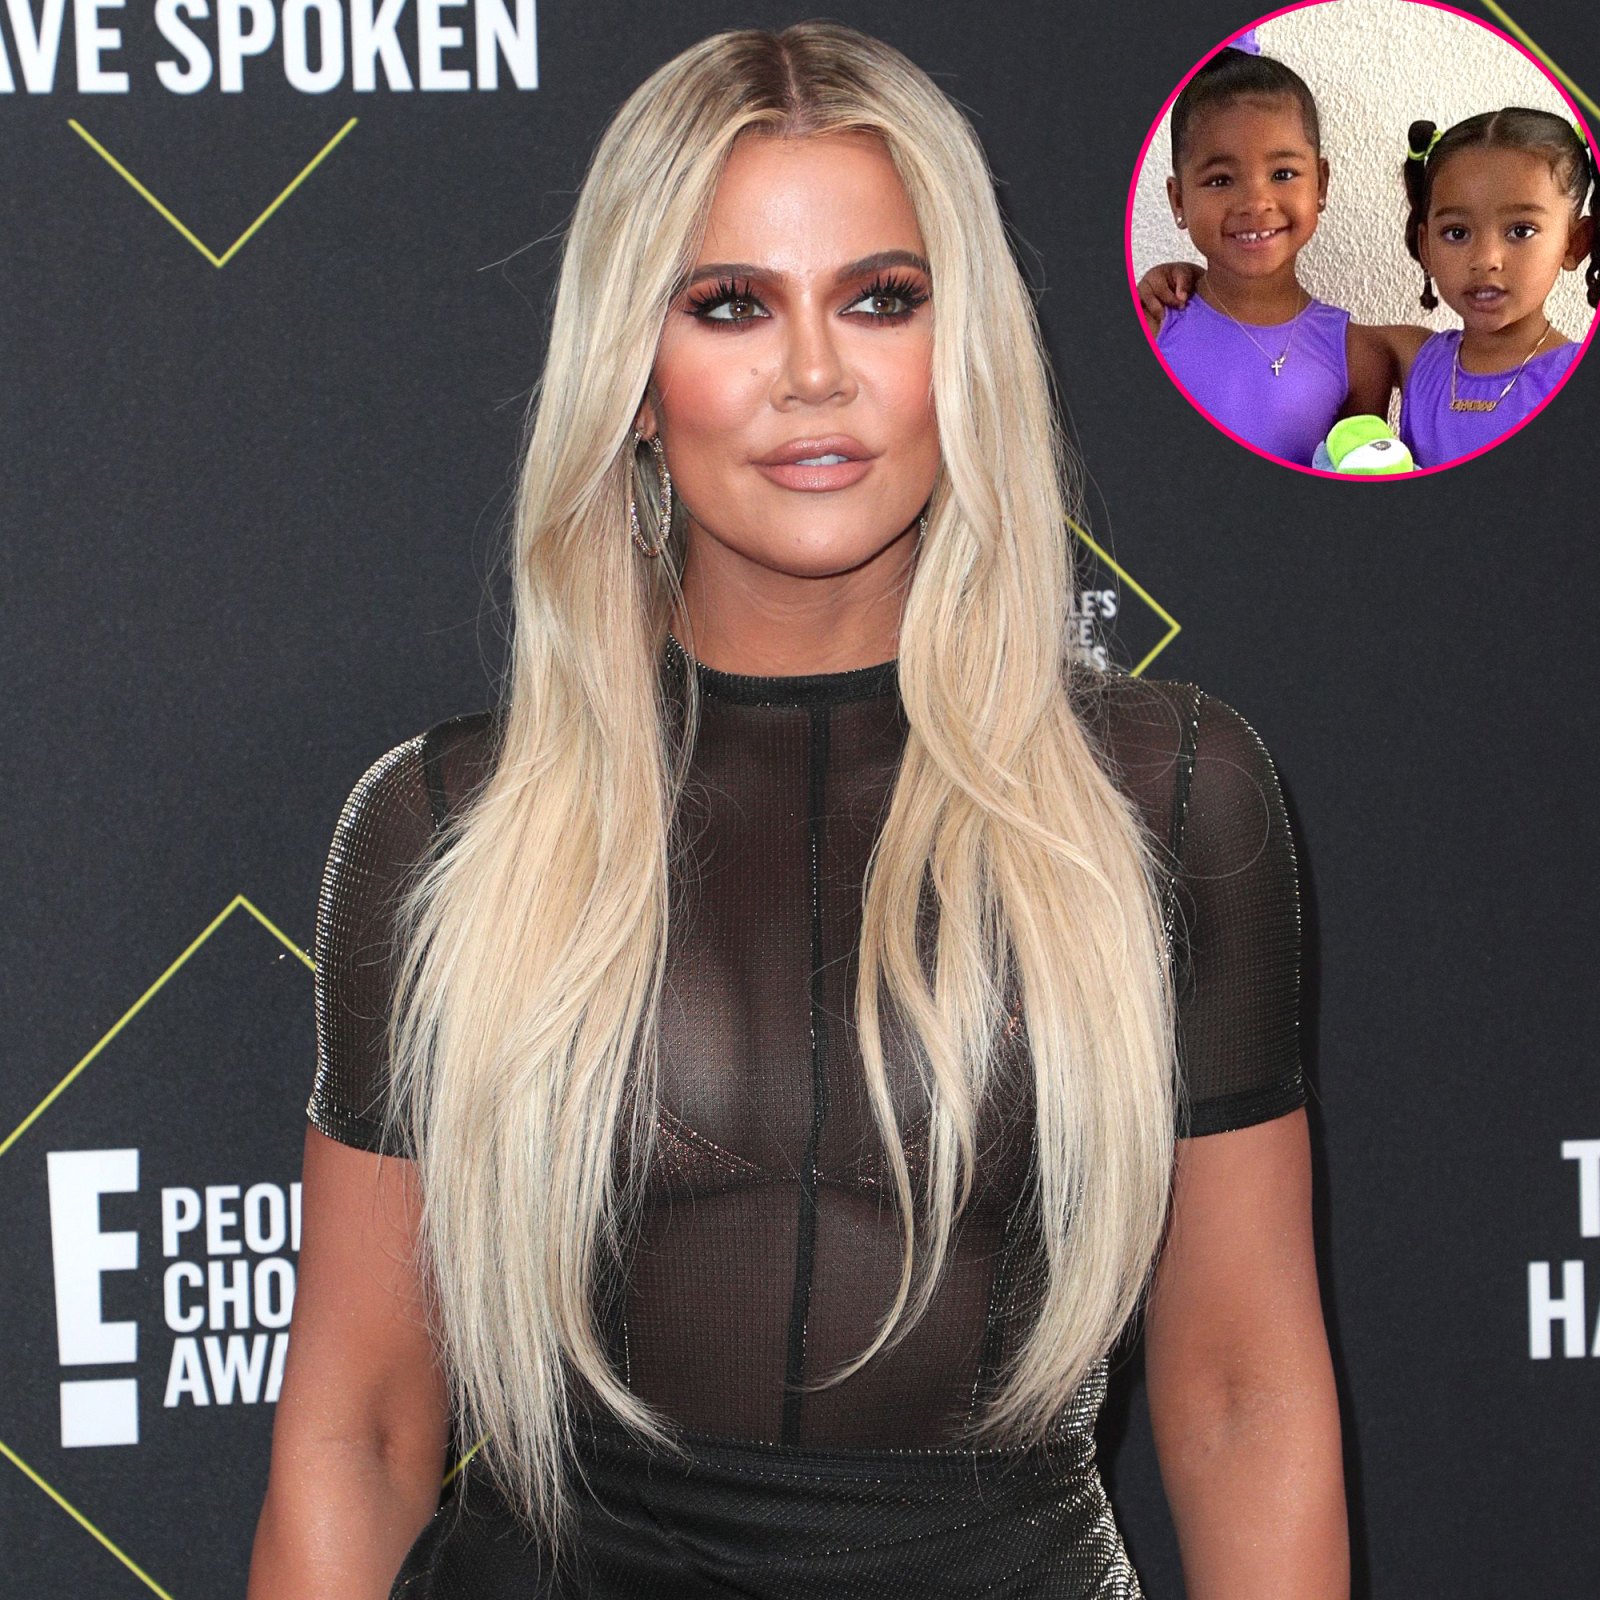 Khloe Kardashian Spends ‘Girls Day’ With Daughter True and Niece Chicago: Photos